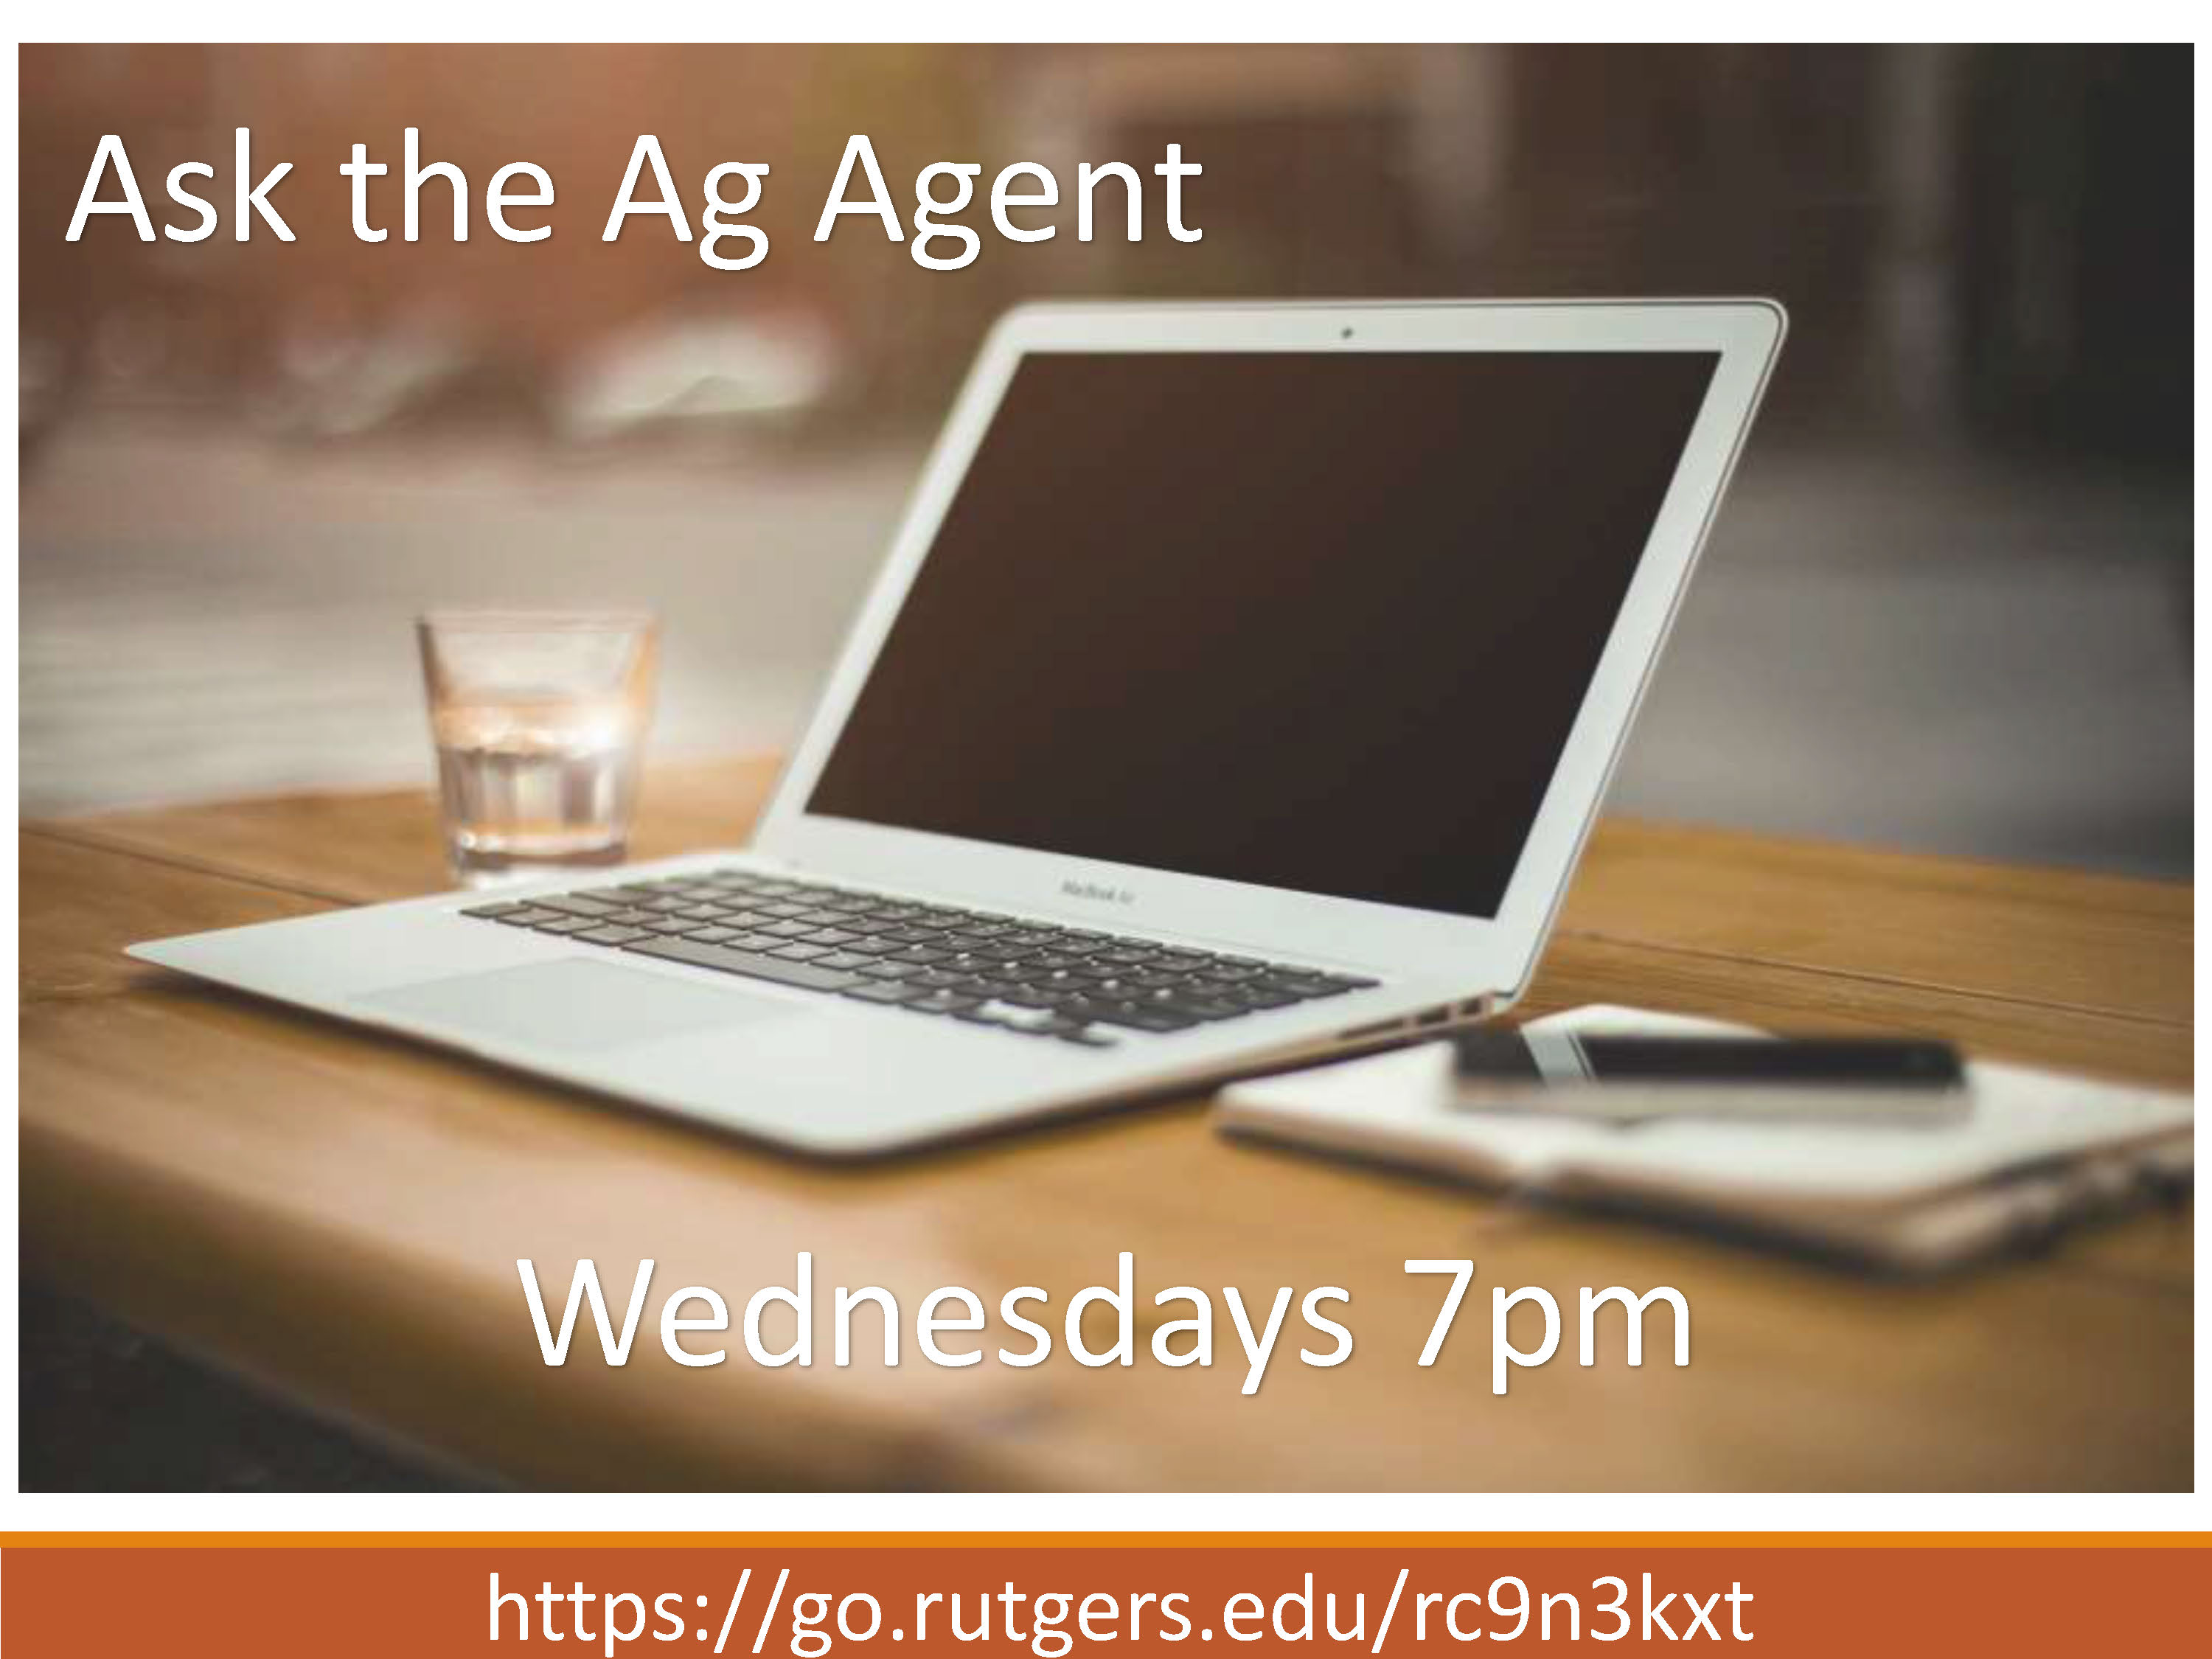 Ask the Ag Agent Promo Image